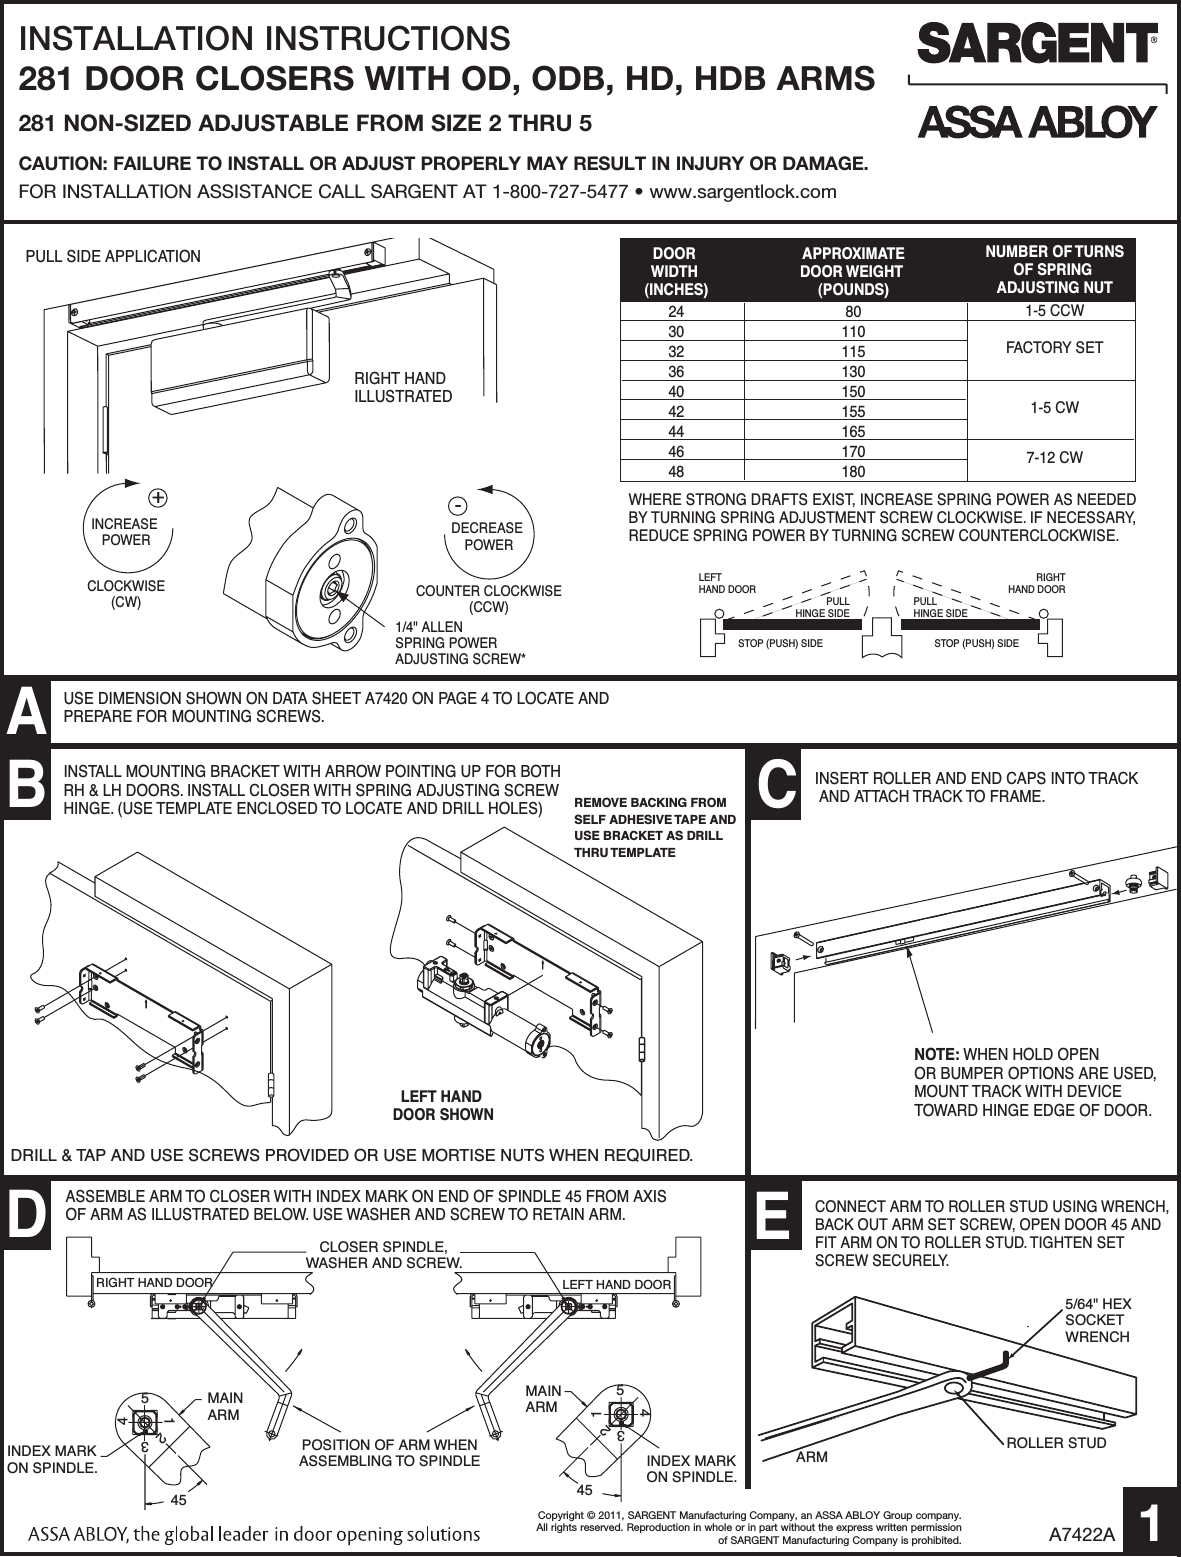 Sargent Installation Instructions For 281 Series Door Closers W/OD/ODB